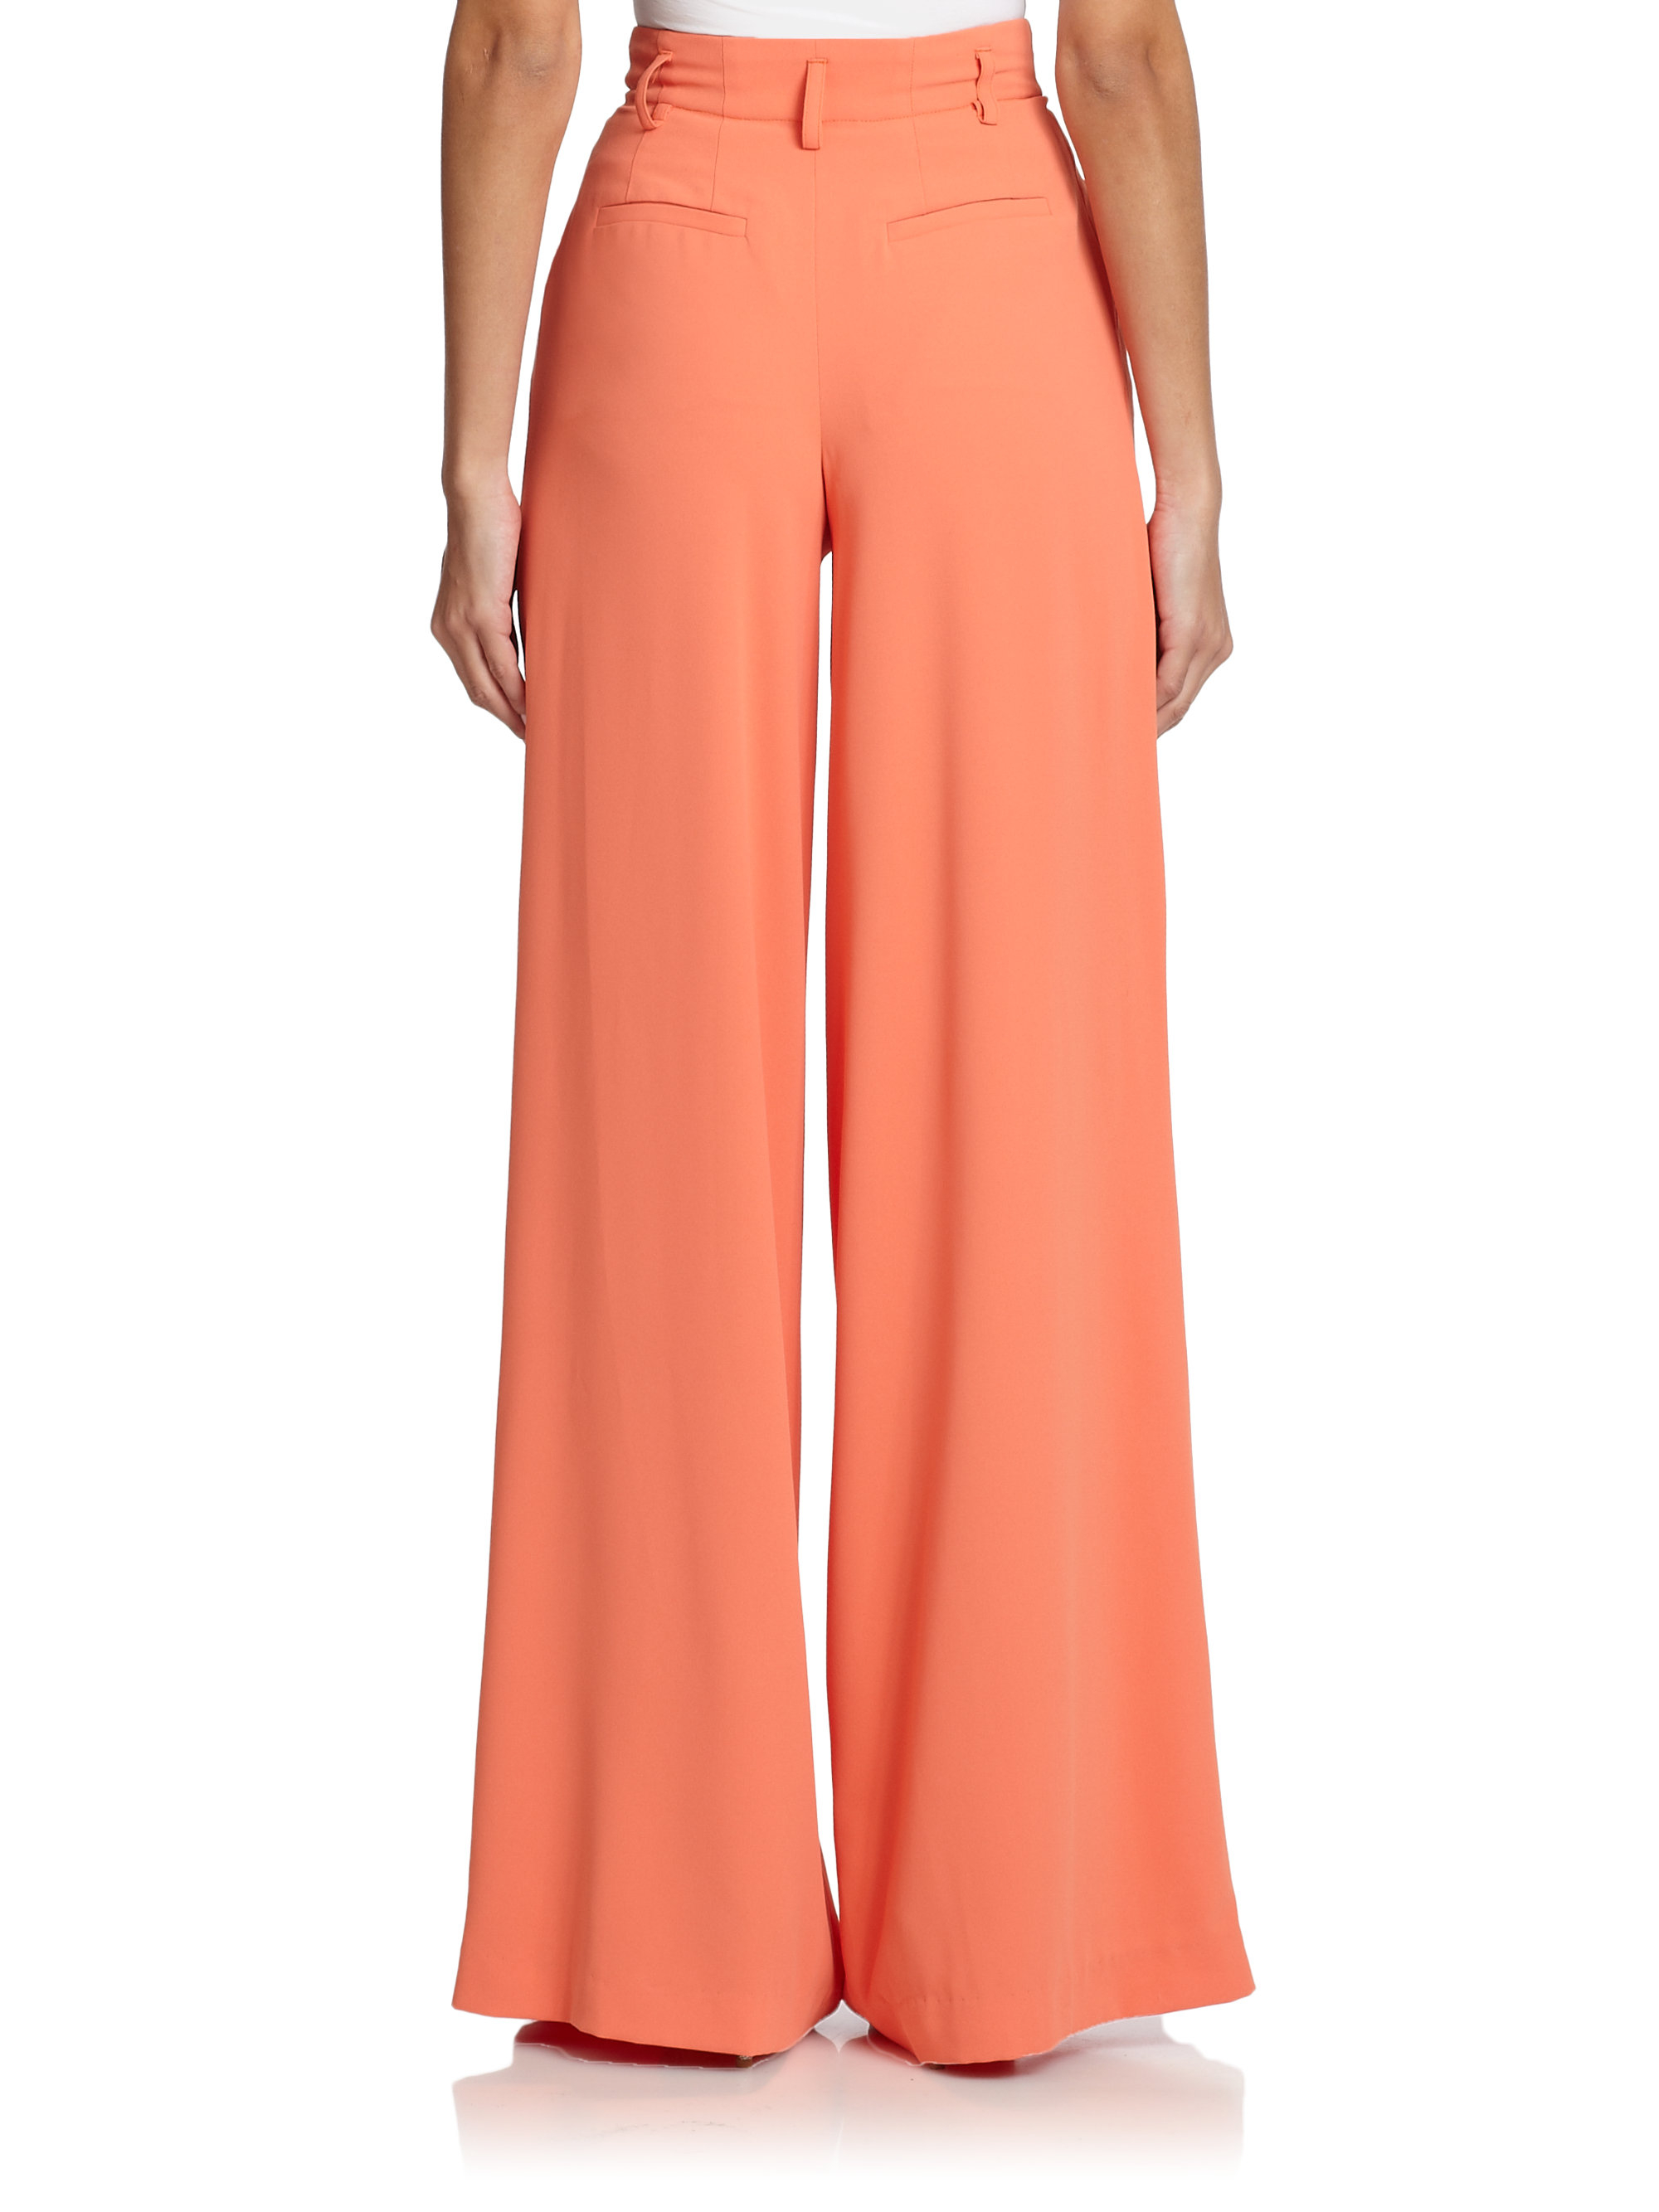 Alice + Olivia High-Waisted Wide-Leg Pants in Coral (Pink) - Lyst